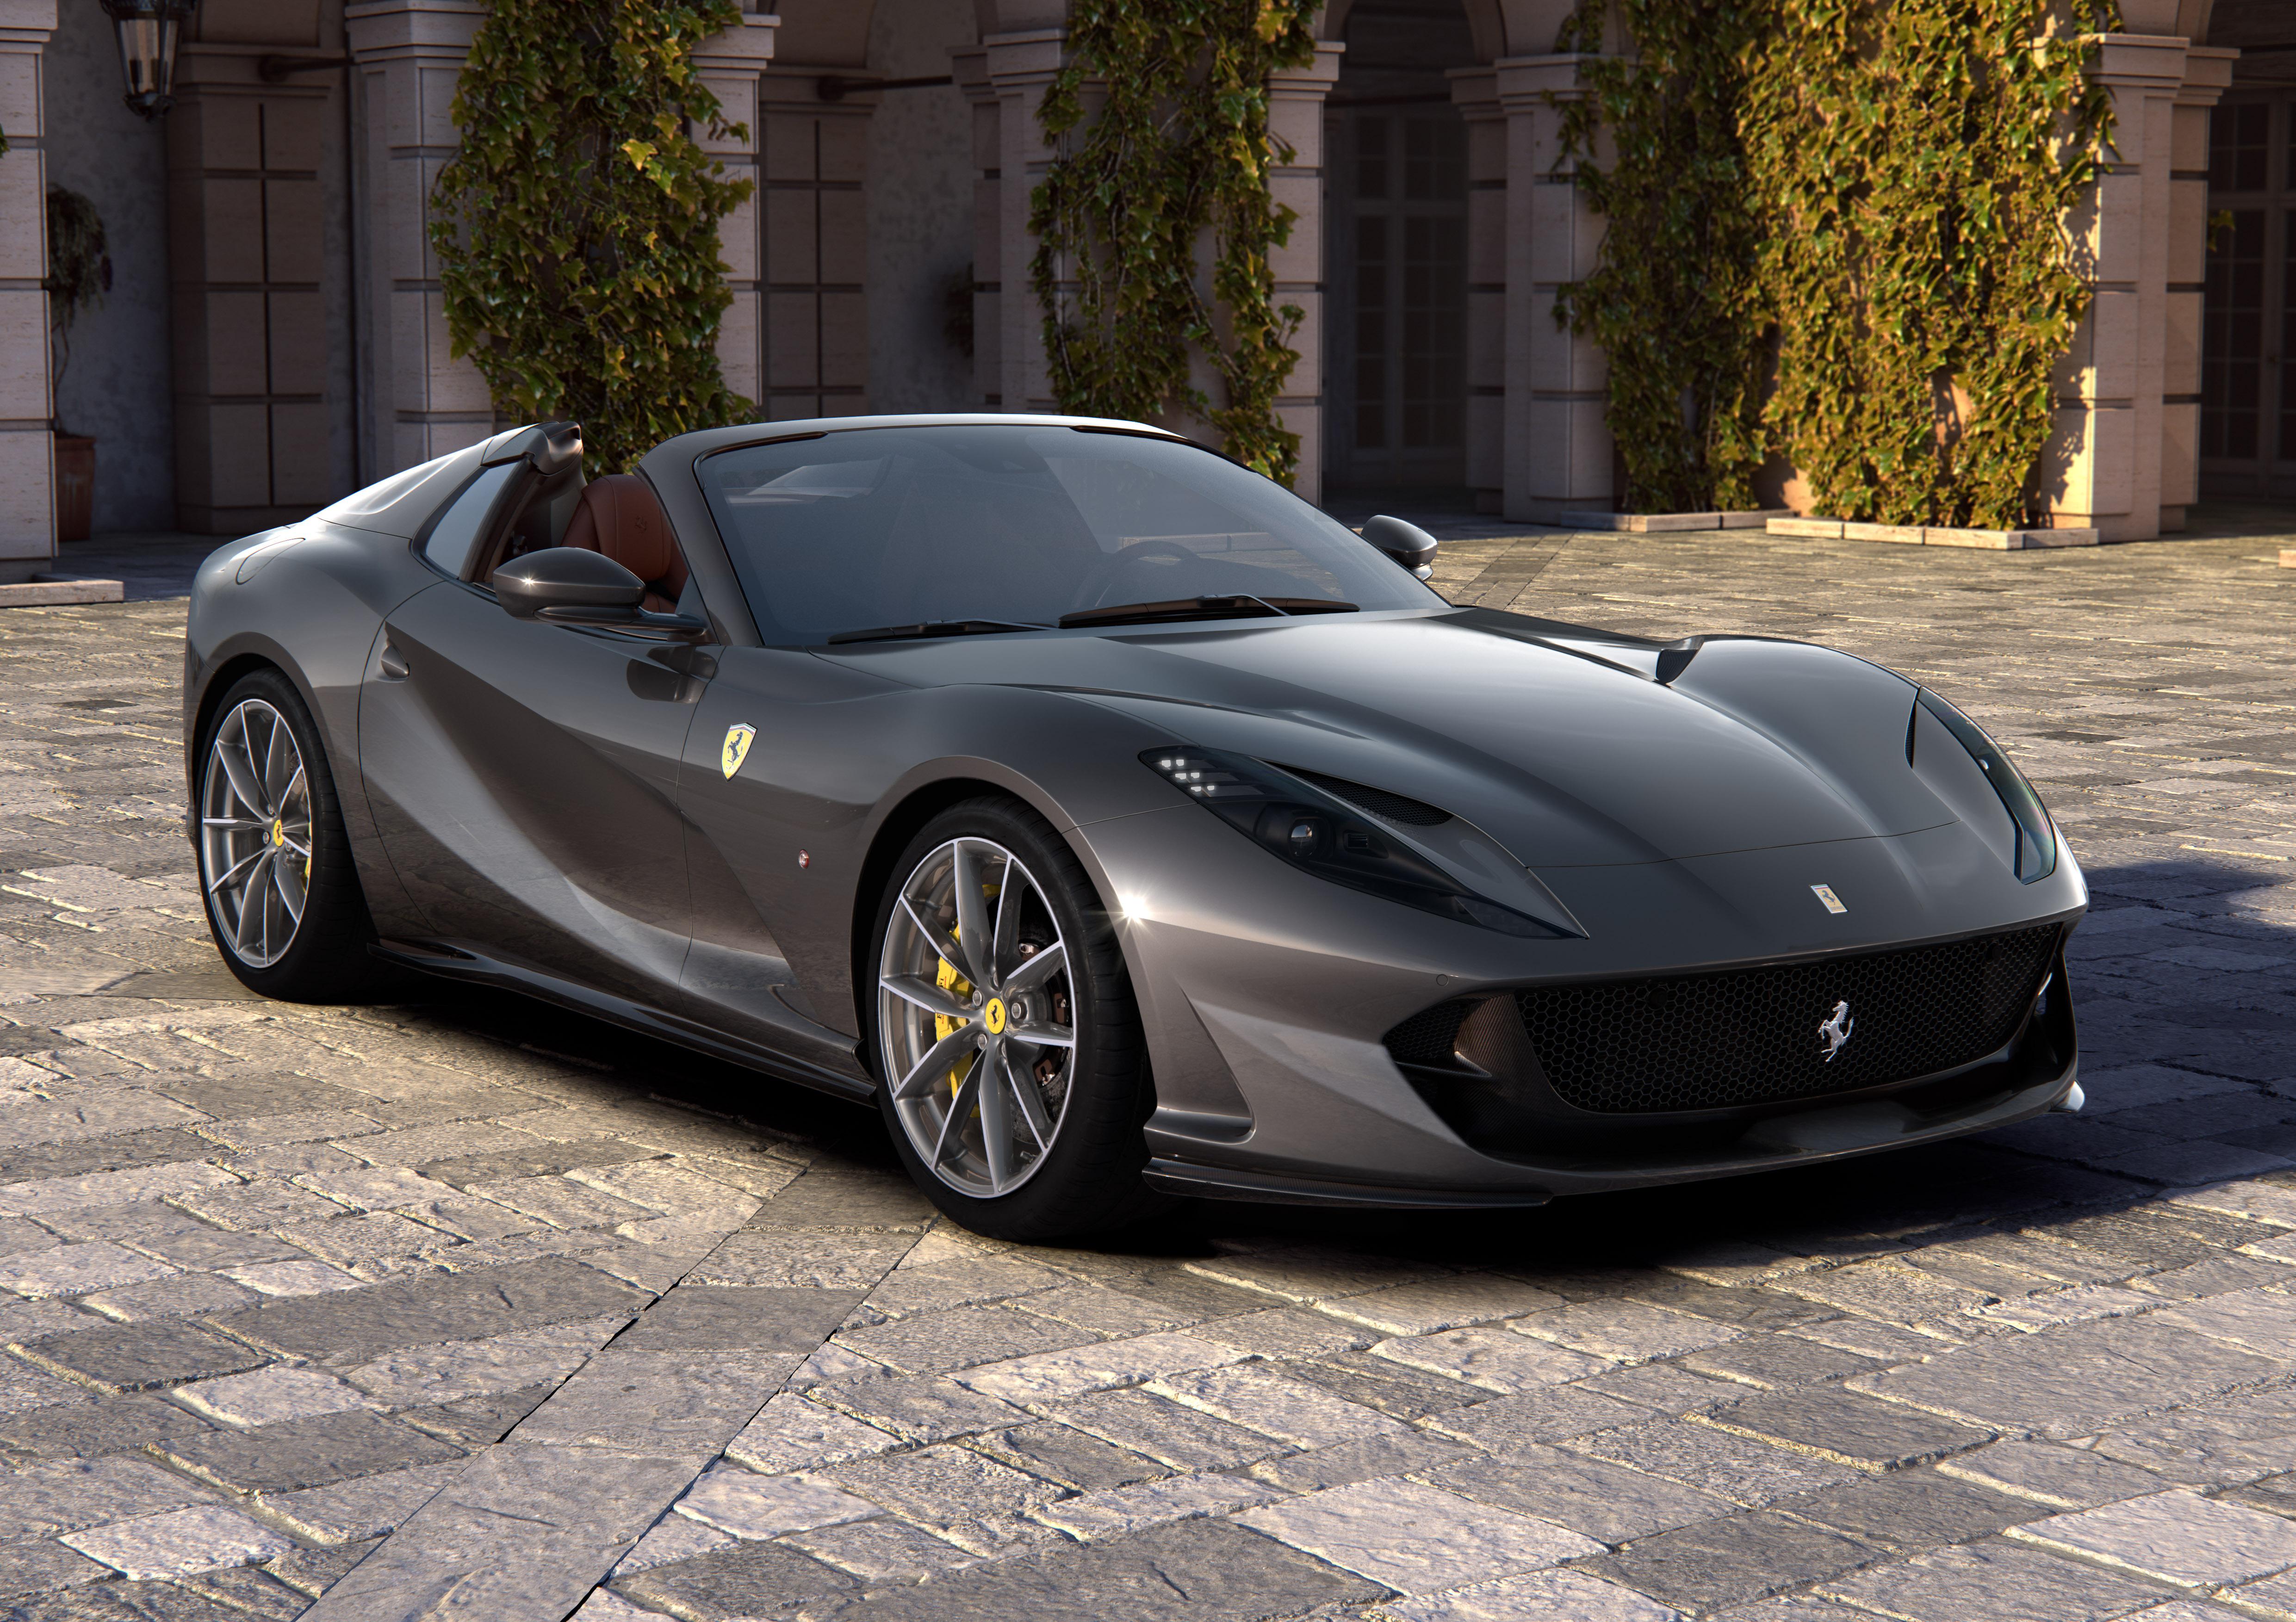 Ferrari Gts Specs Price And Uk Release The Week